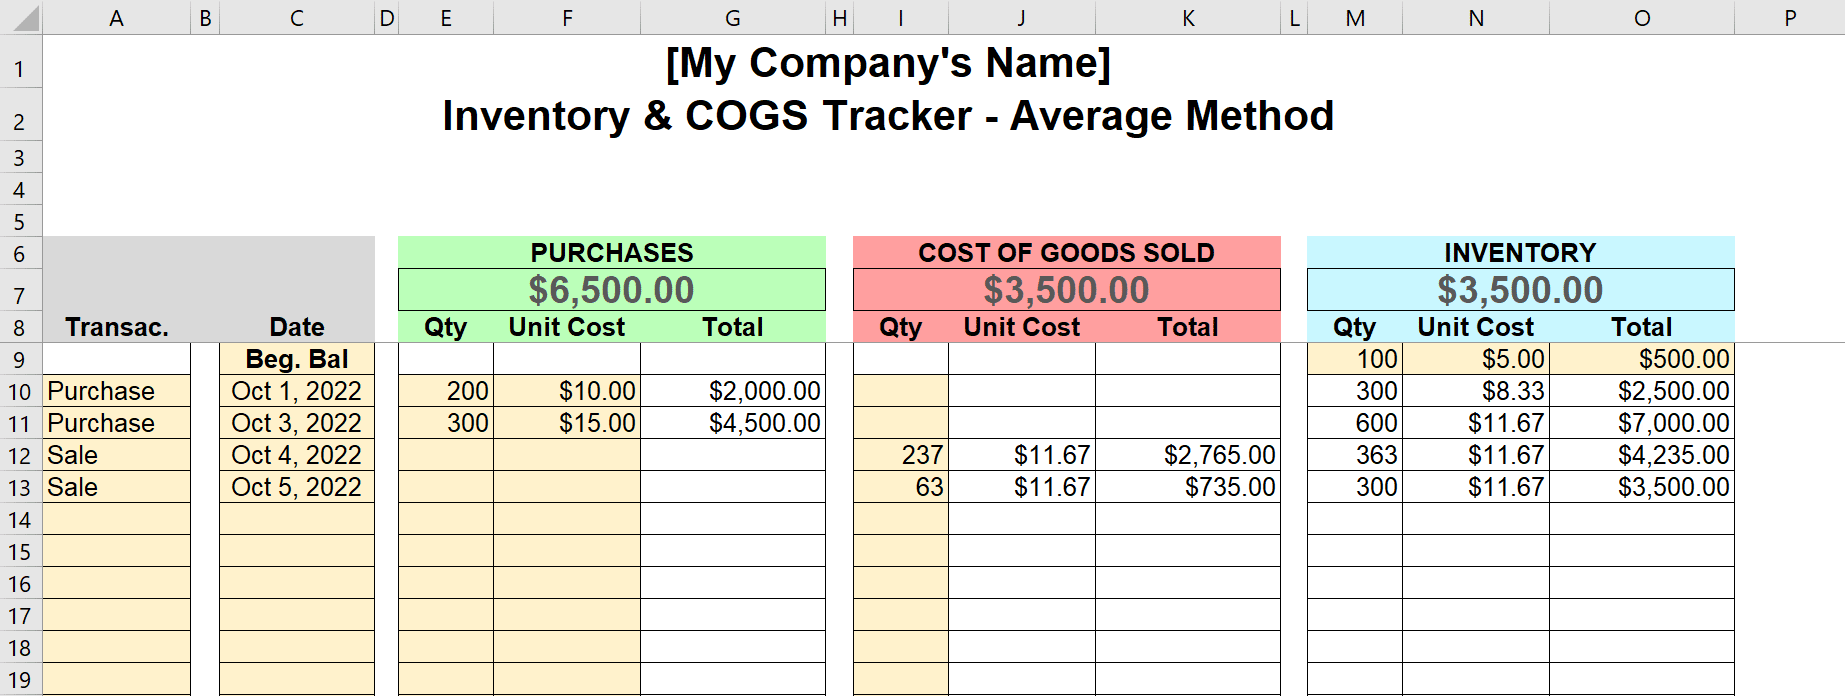 Free Inventory & COGS Tracker Template thumbnail